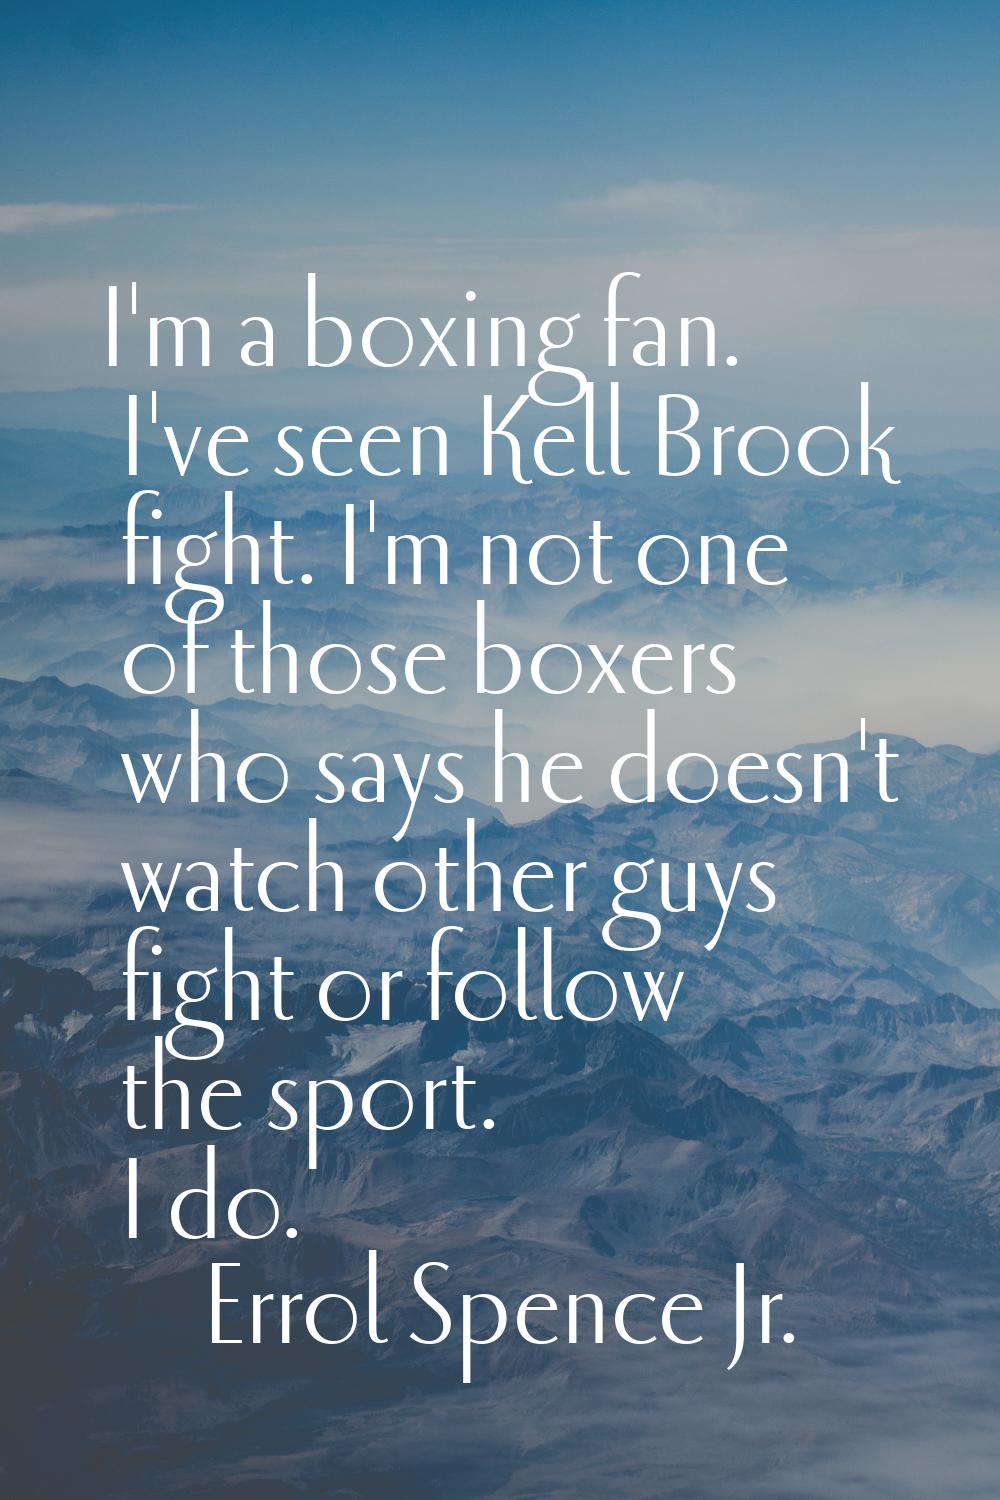 I'm a boxing fan. I've seen Kell Brook fight. I'm not one of those boxers who says he doesn't watch